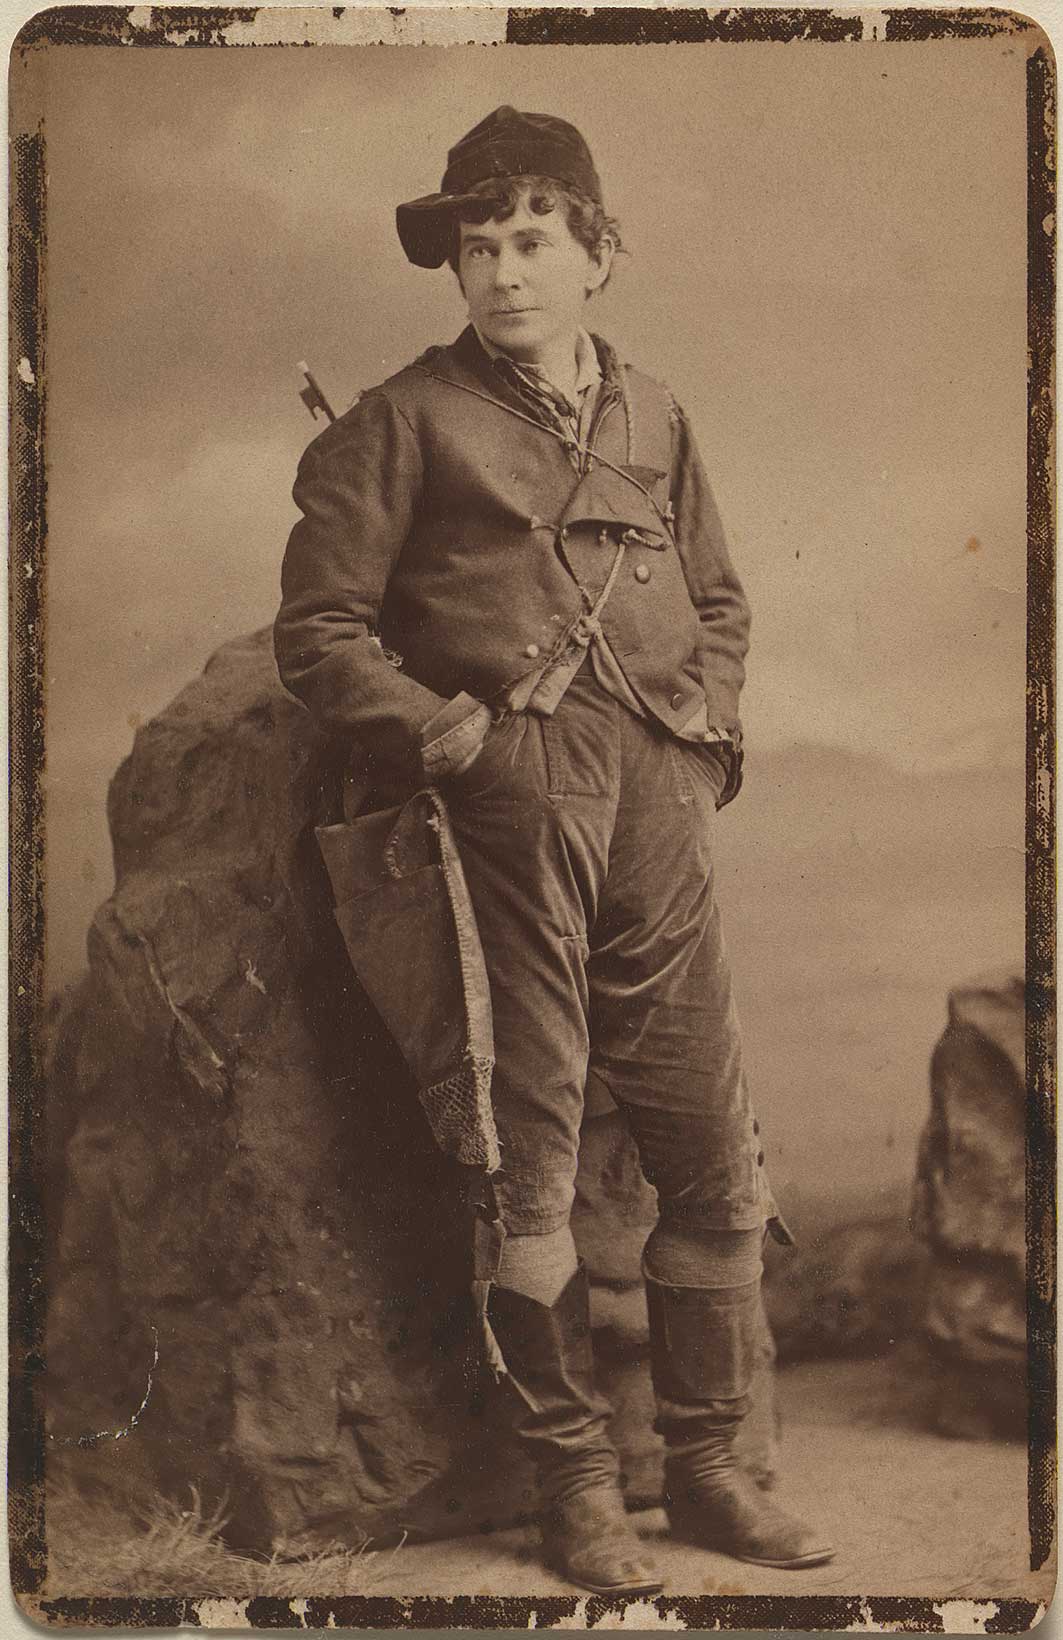 A sepia toned old photograph of a young man leaning against a rock